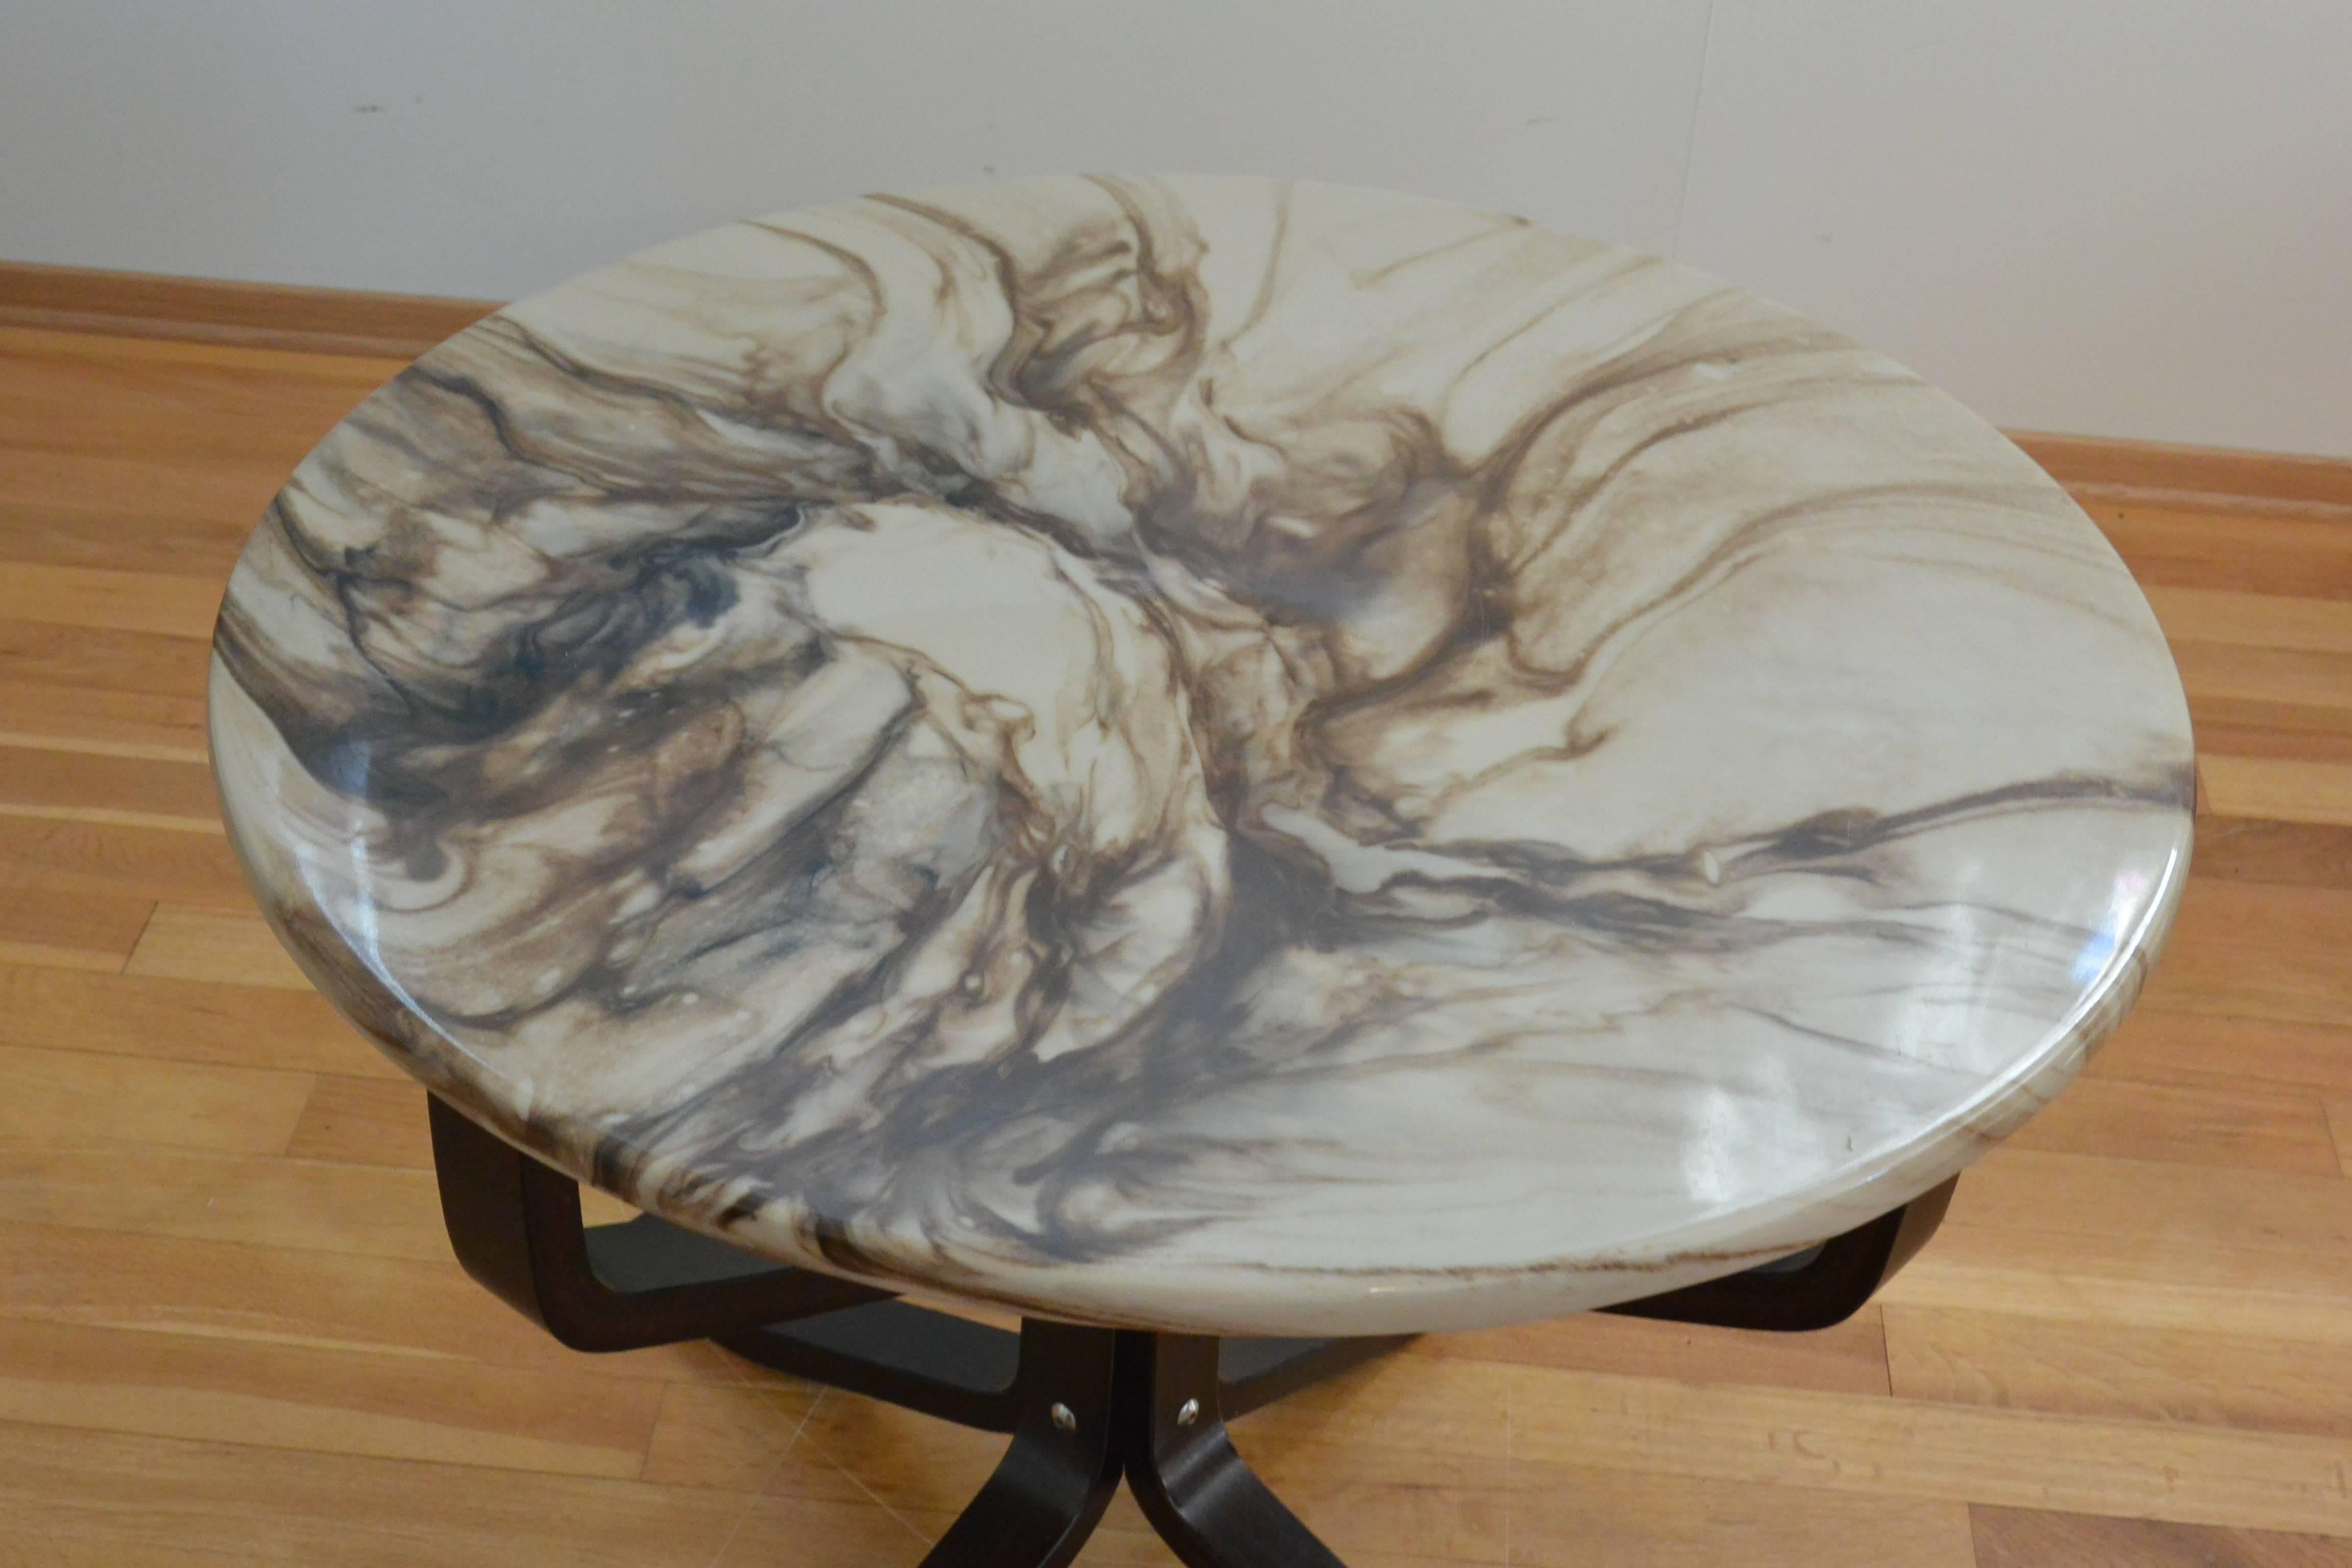 Marble composite falcon table made designed by Sigurd Ressell for Vatne Møbler, Norway, late 1970s.

The composite marble-top is made from marble powders and resin to creating the strong marble effect table. (70% marble powders/30%resin, making it